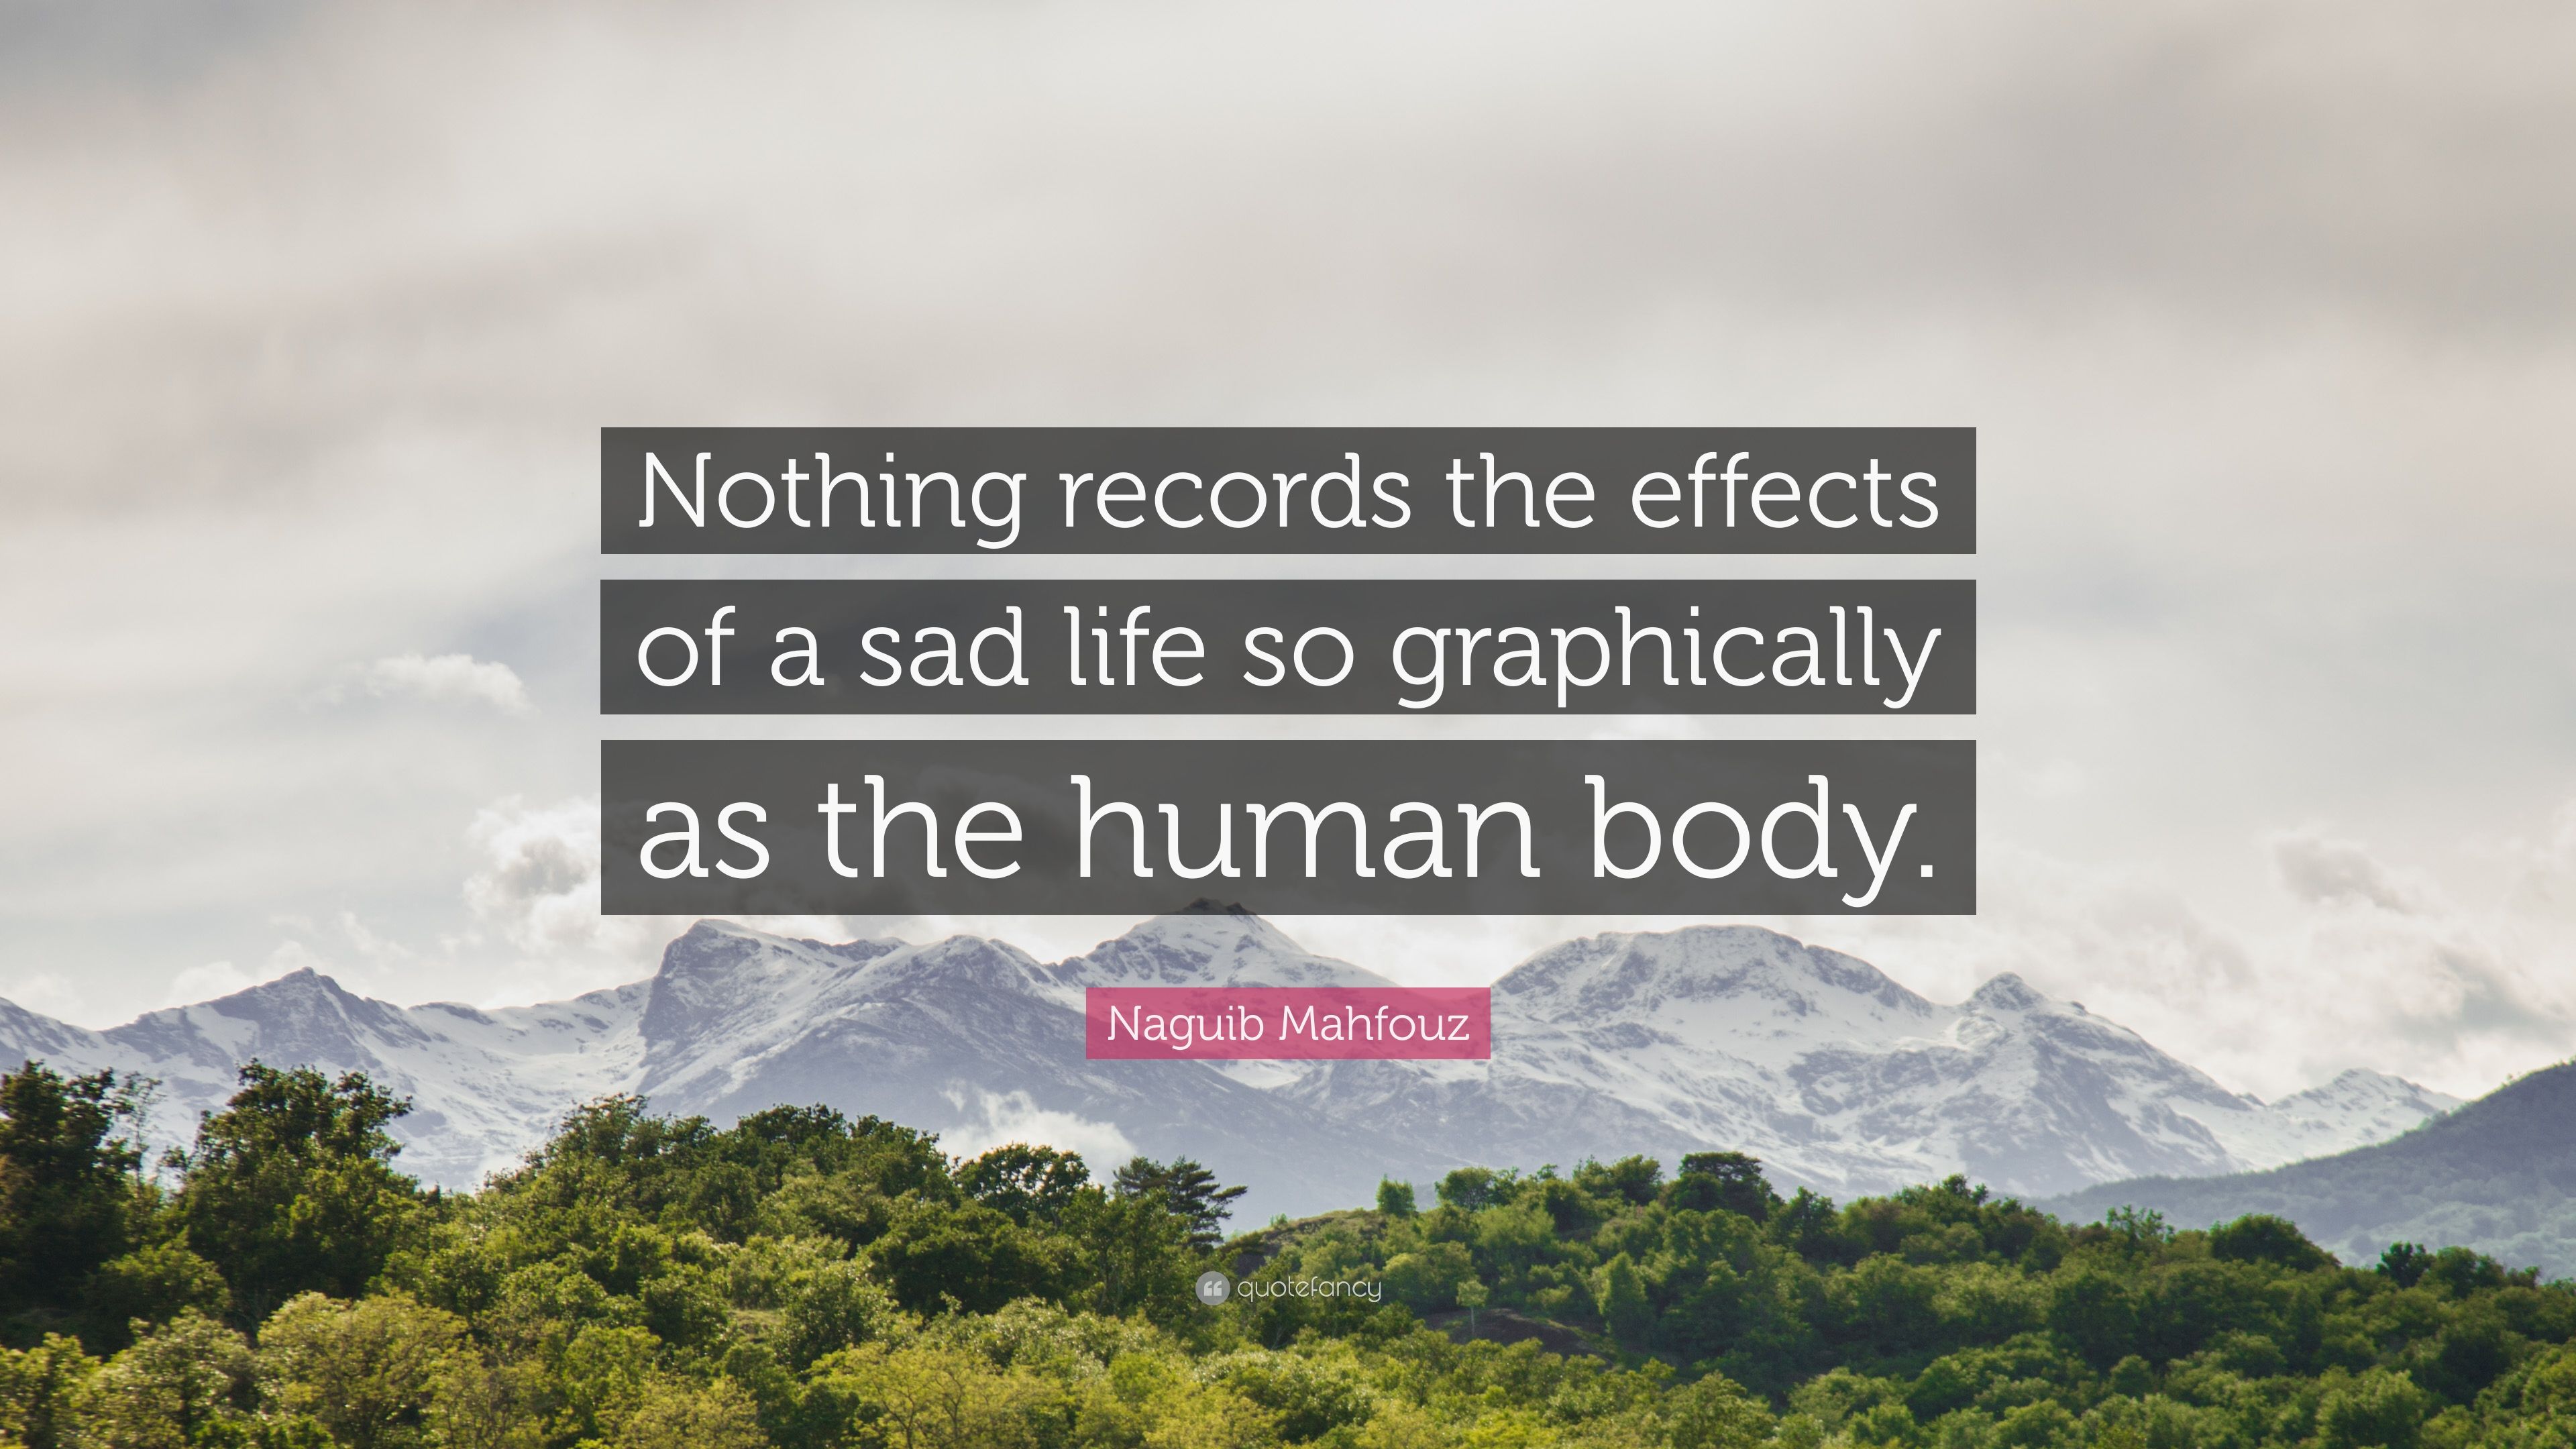 Naguib Mahfouz Quote: “Nothing records the effects of a sad life so graphically as the human body.” (10 wallpaper)